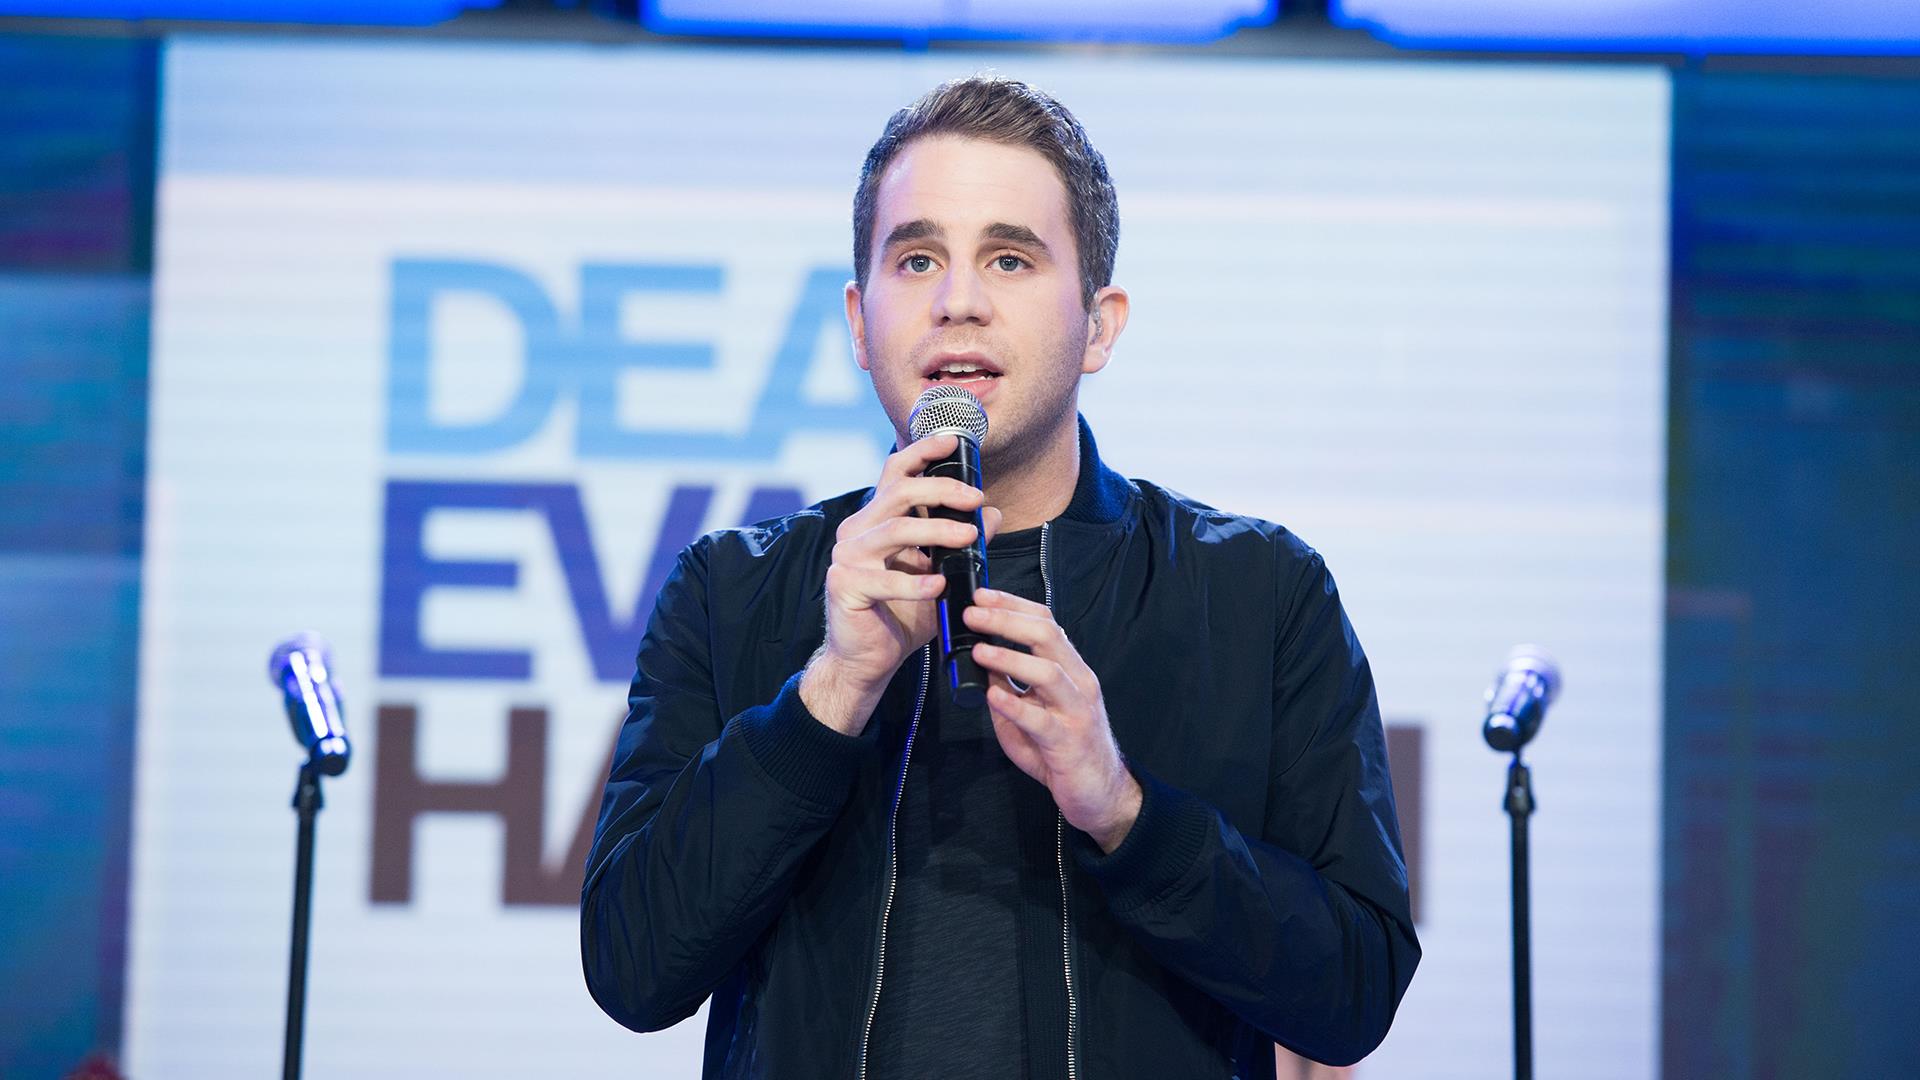 Watch stars of Broadway musical ‘Dear Evan Hansen’ perform live on TODAY - TODAY.com